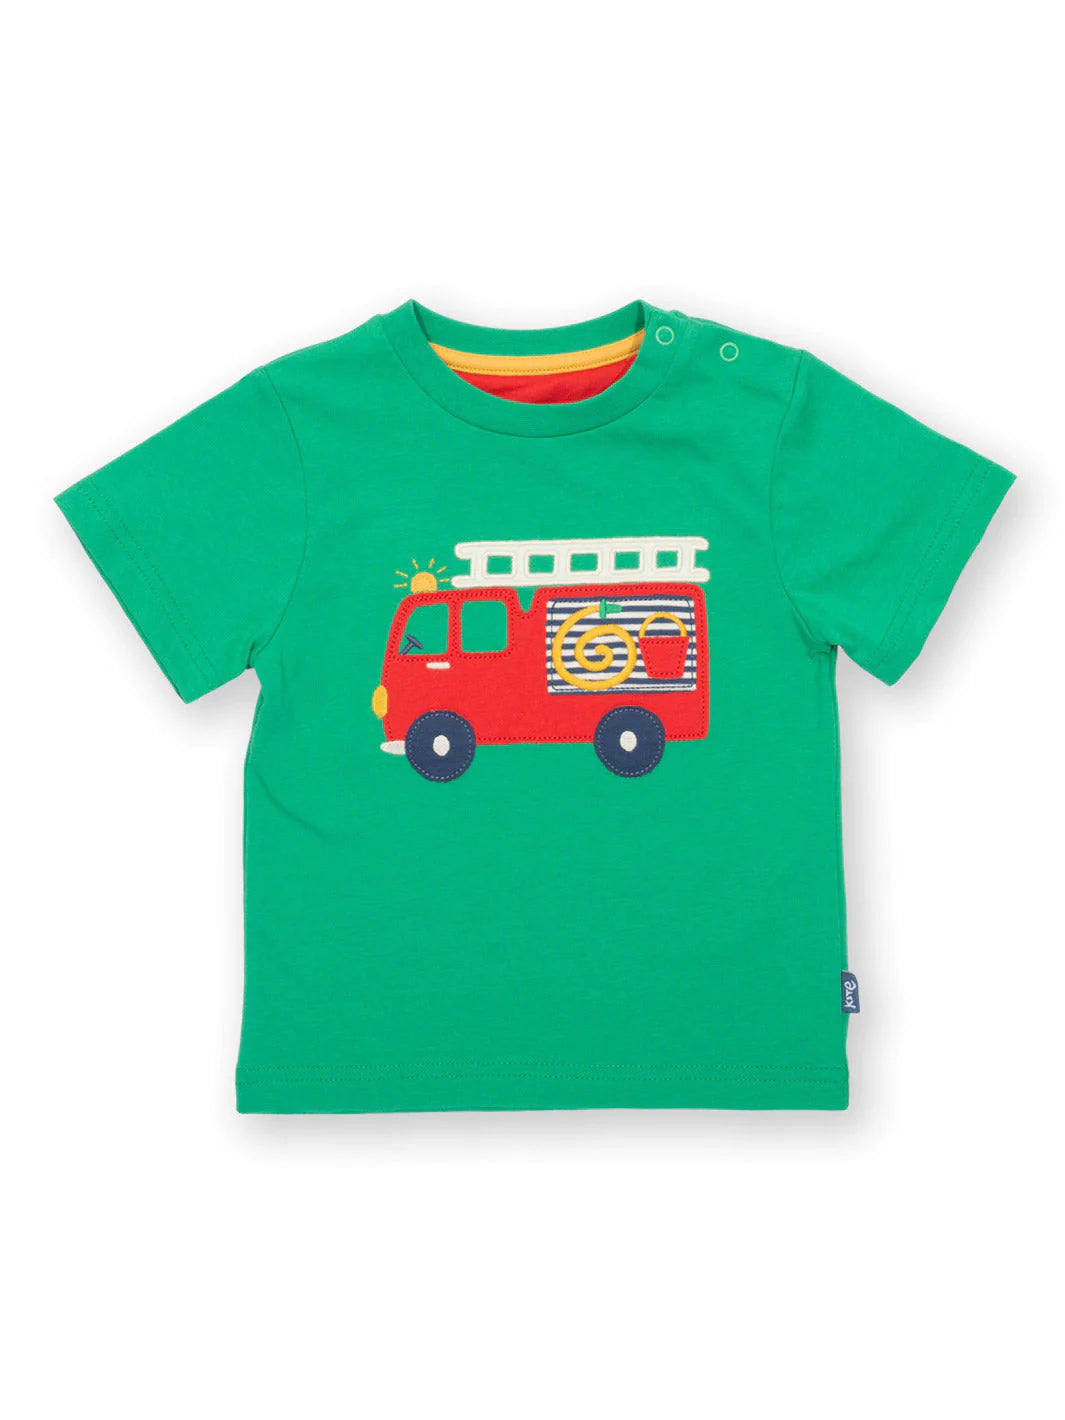 Fire Engine T-Shirt Outfit